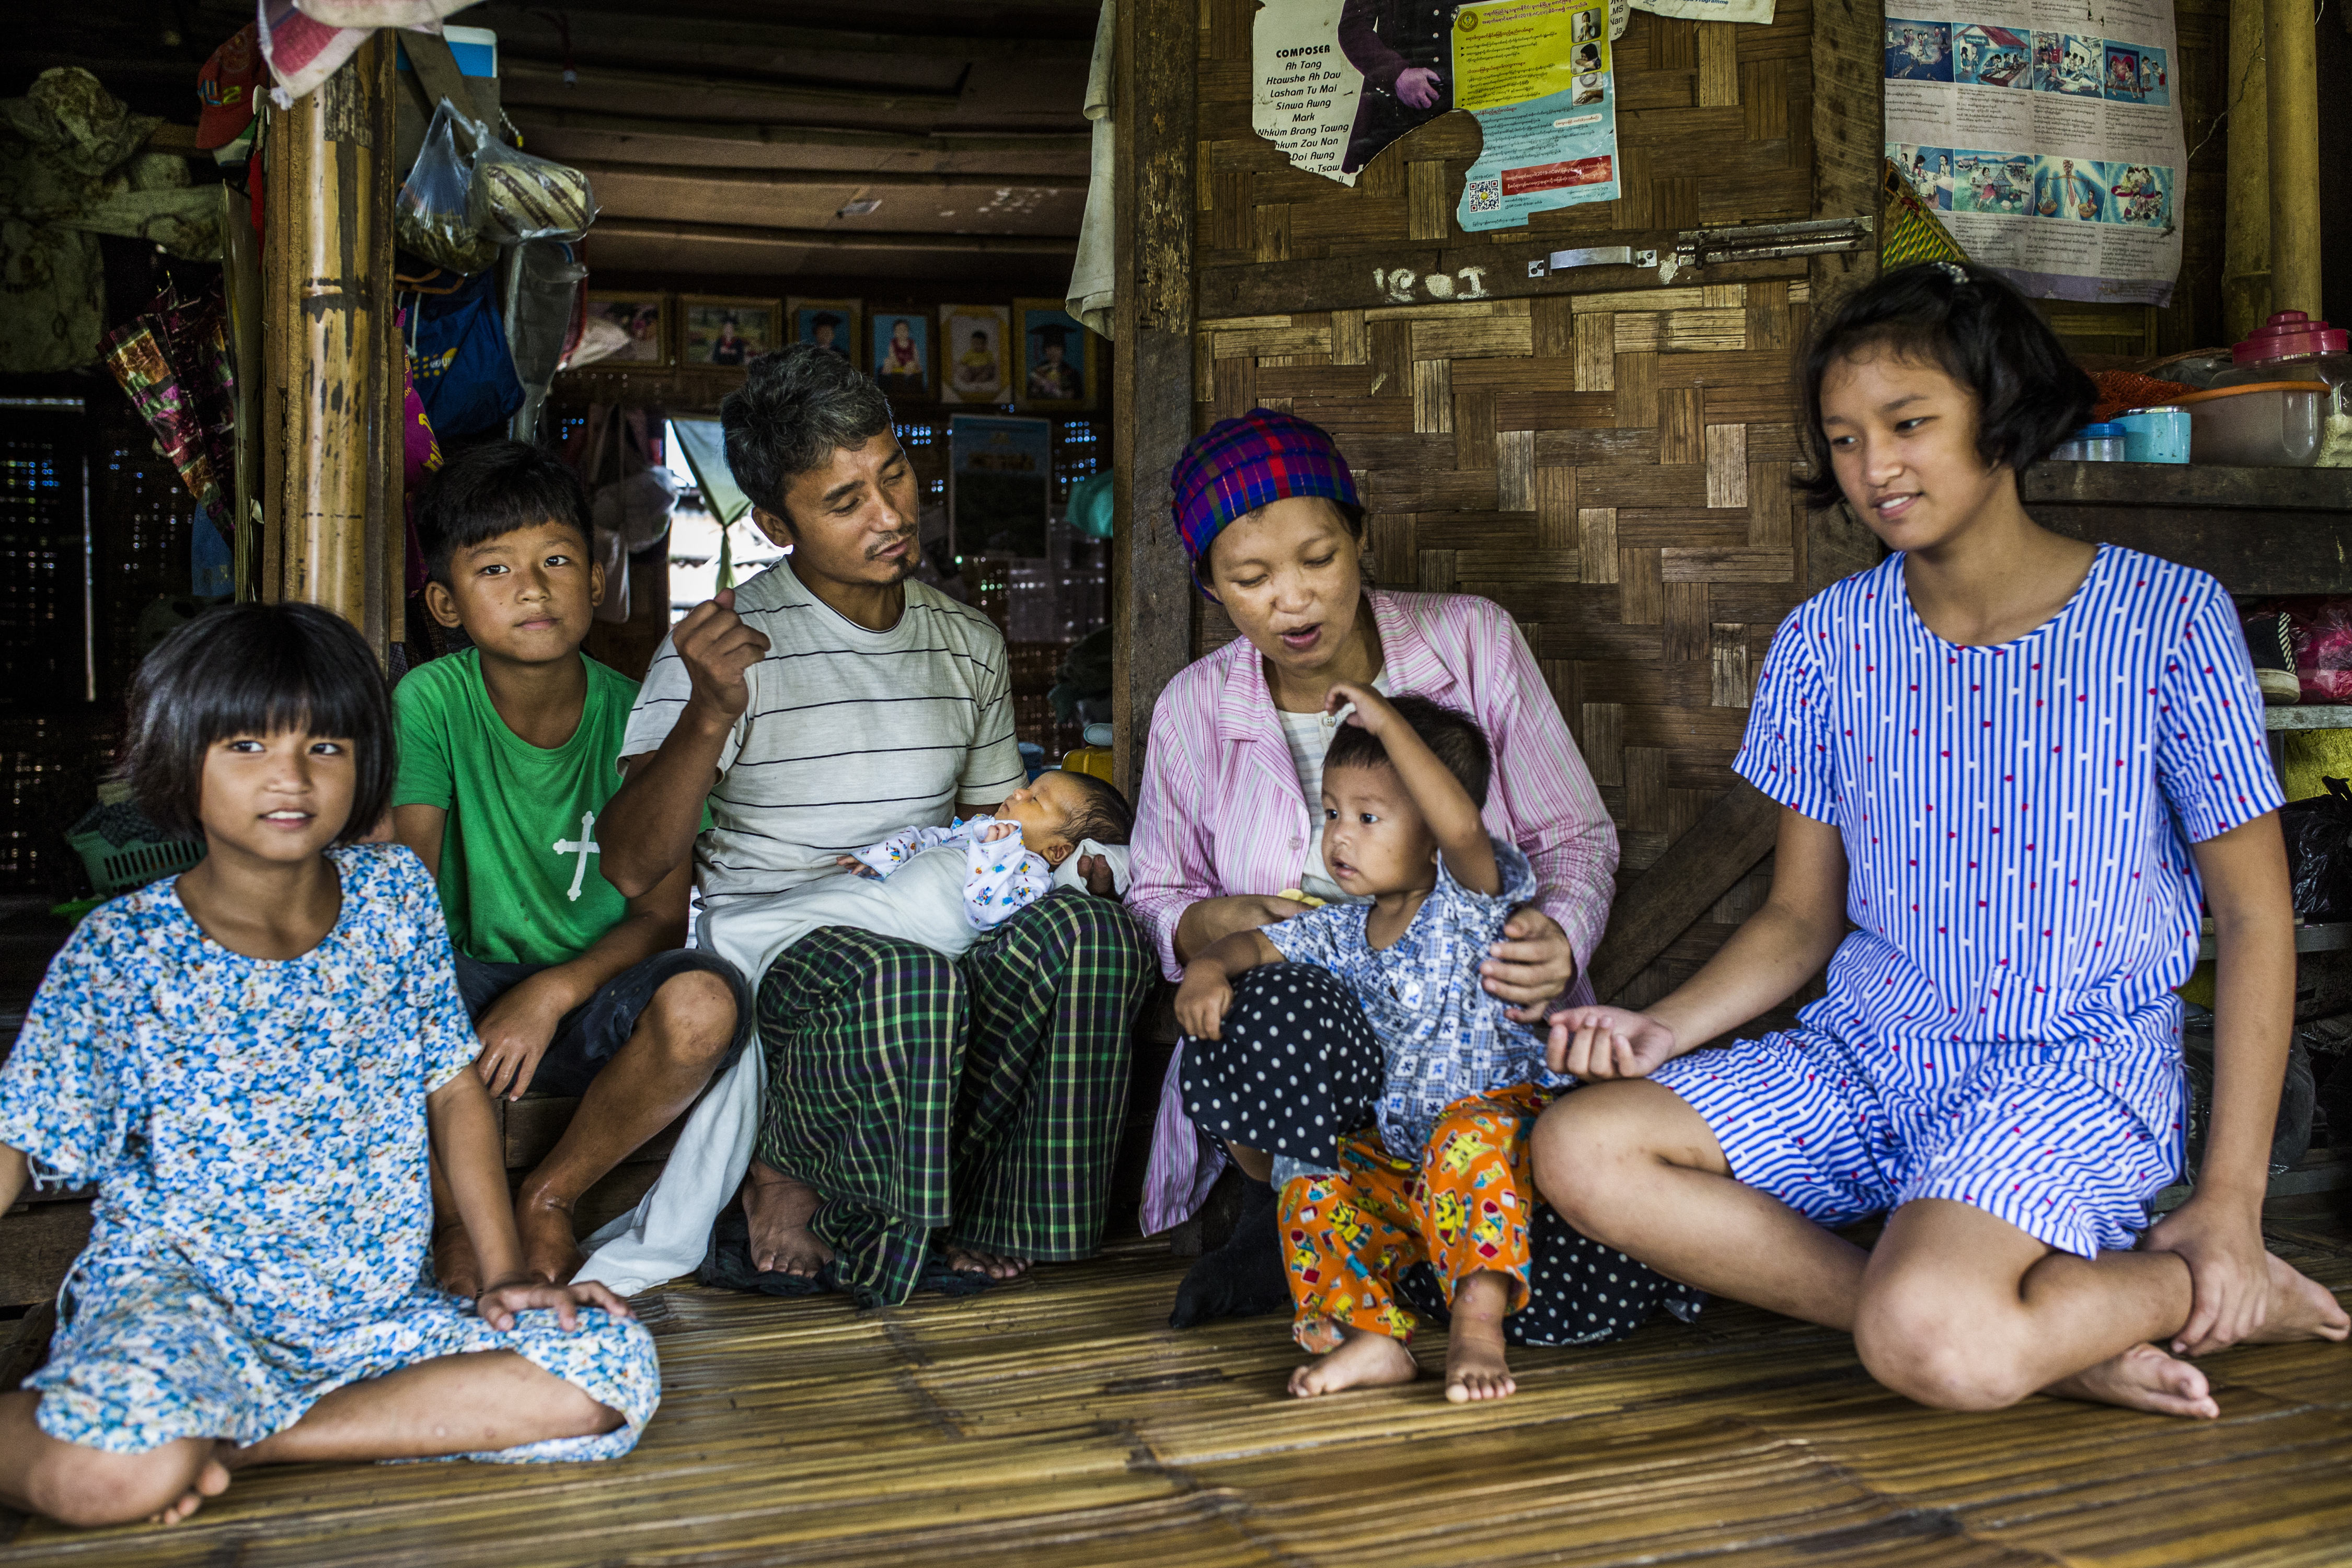 Parents and 5 children of Kachin family kneeling in their home